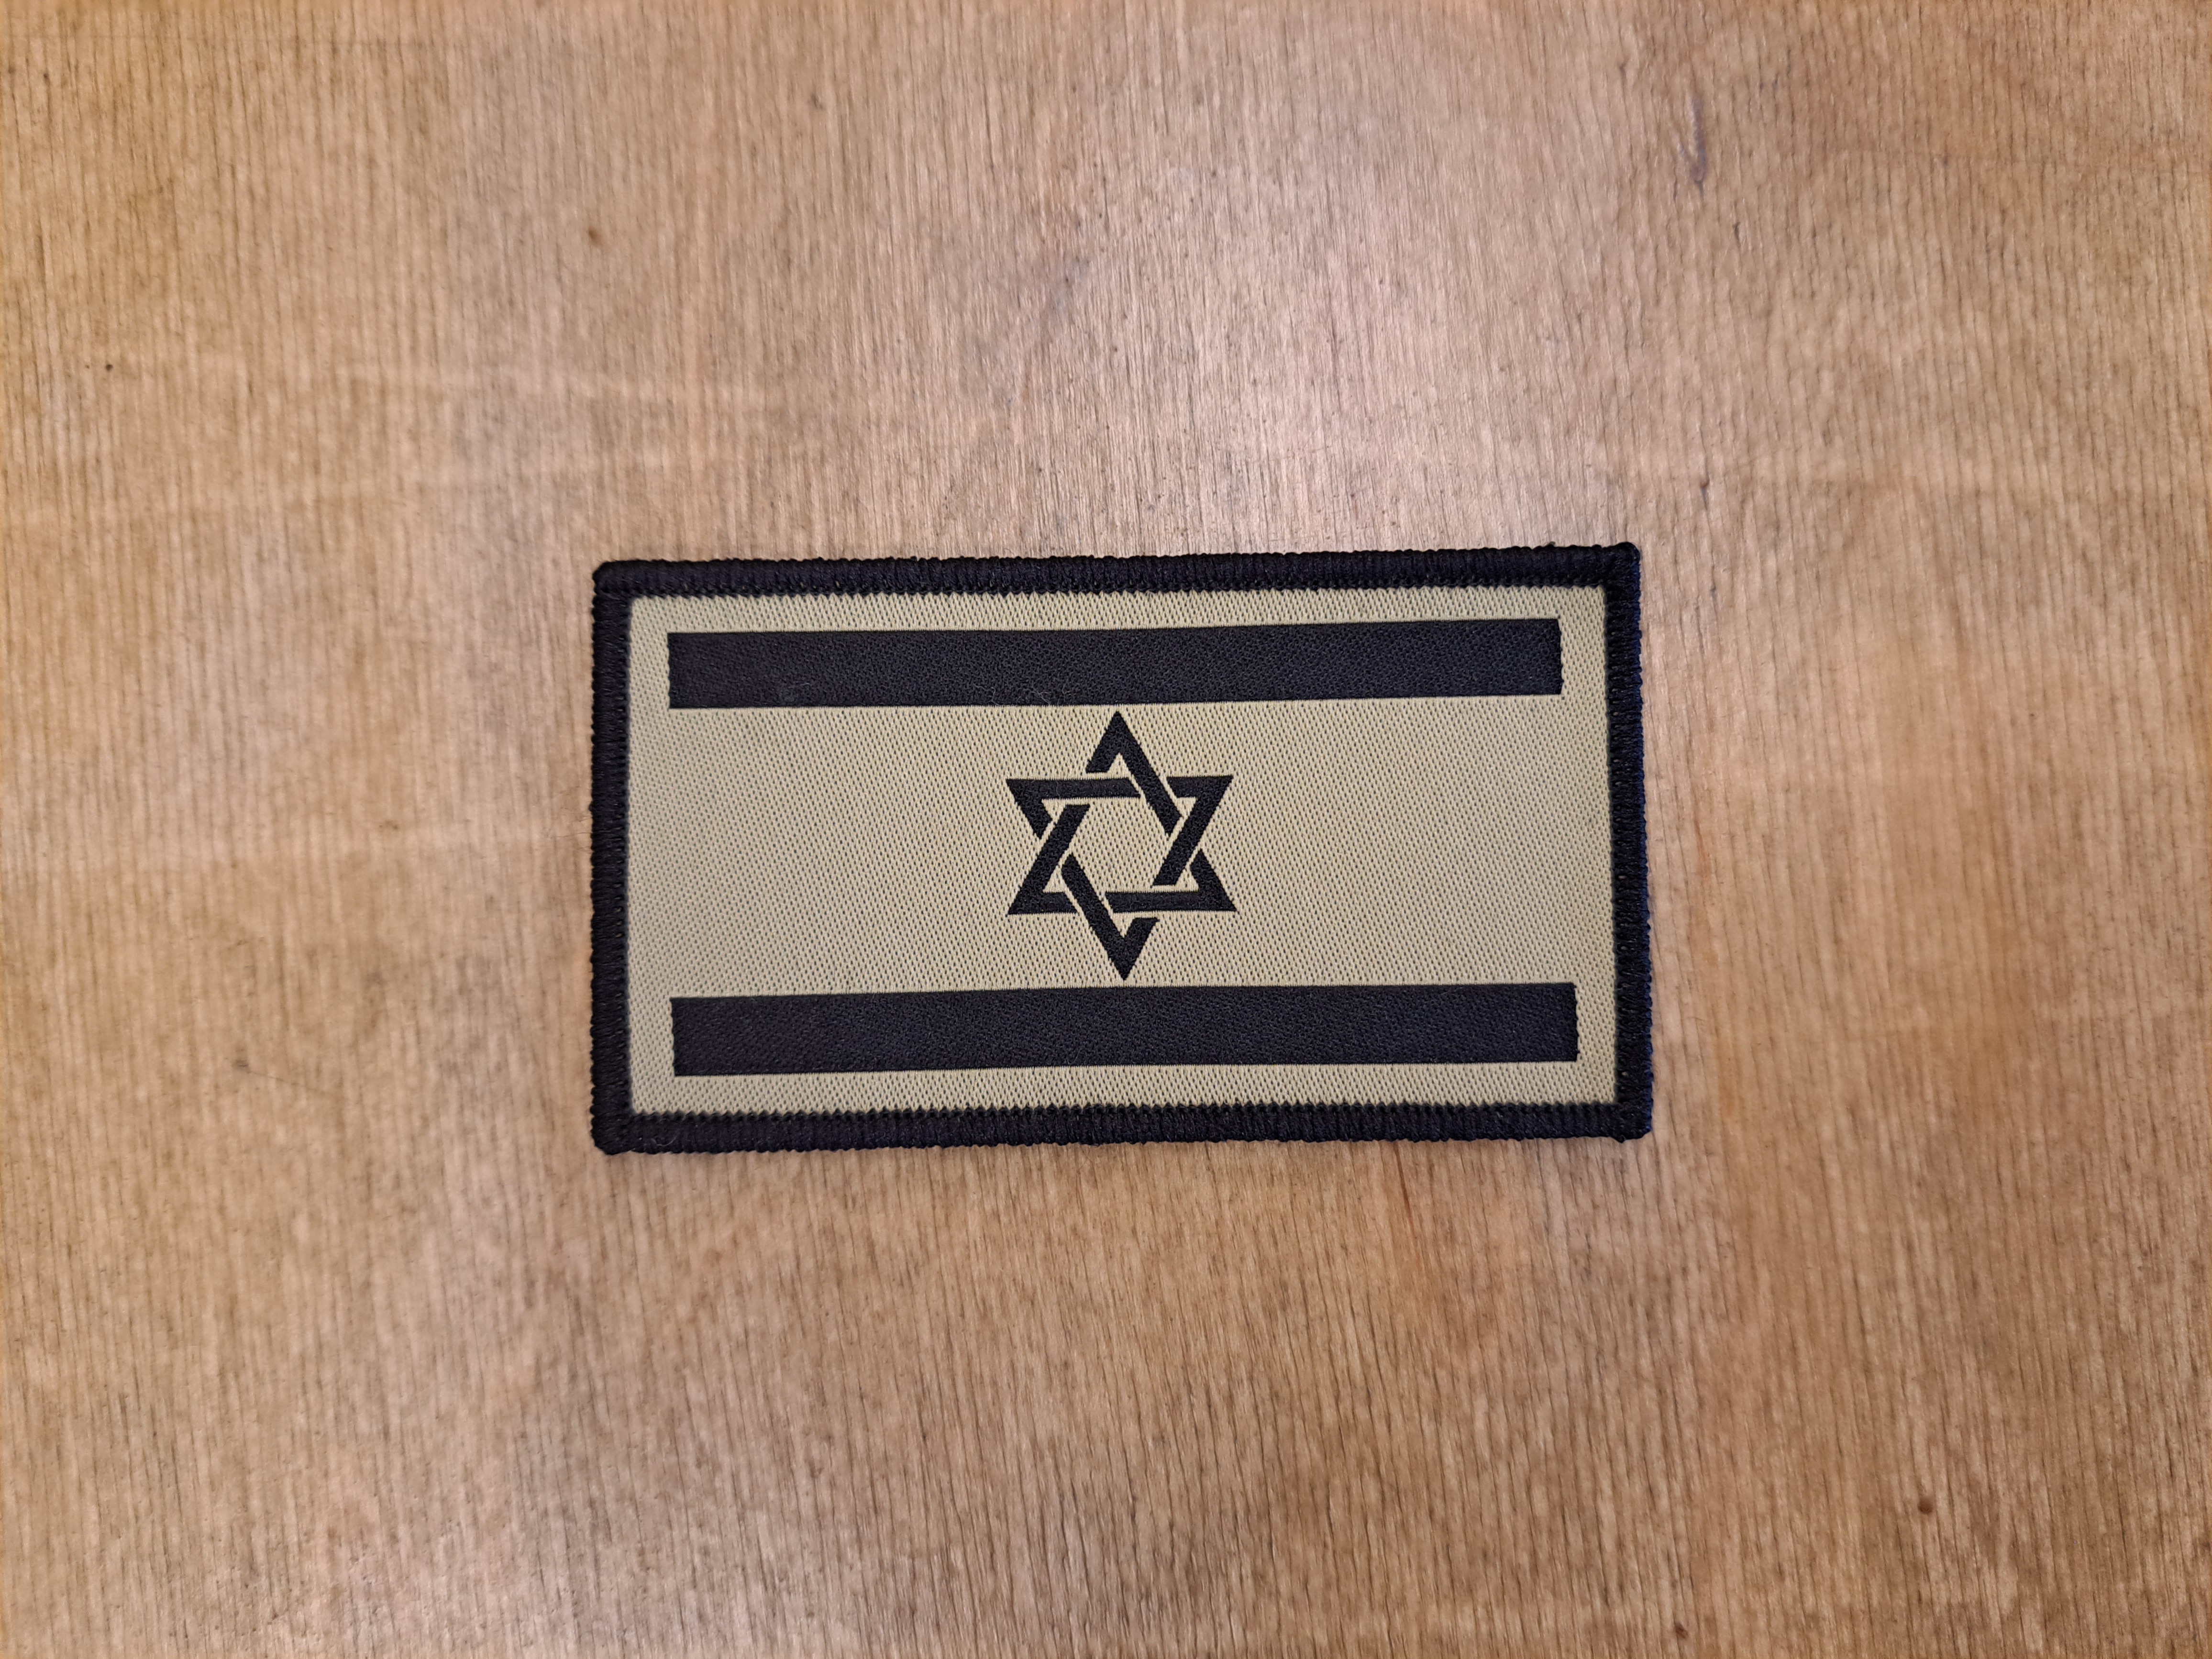 Israel Flag Morale Patch with Velcro